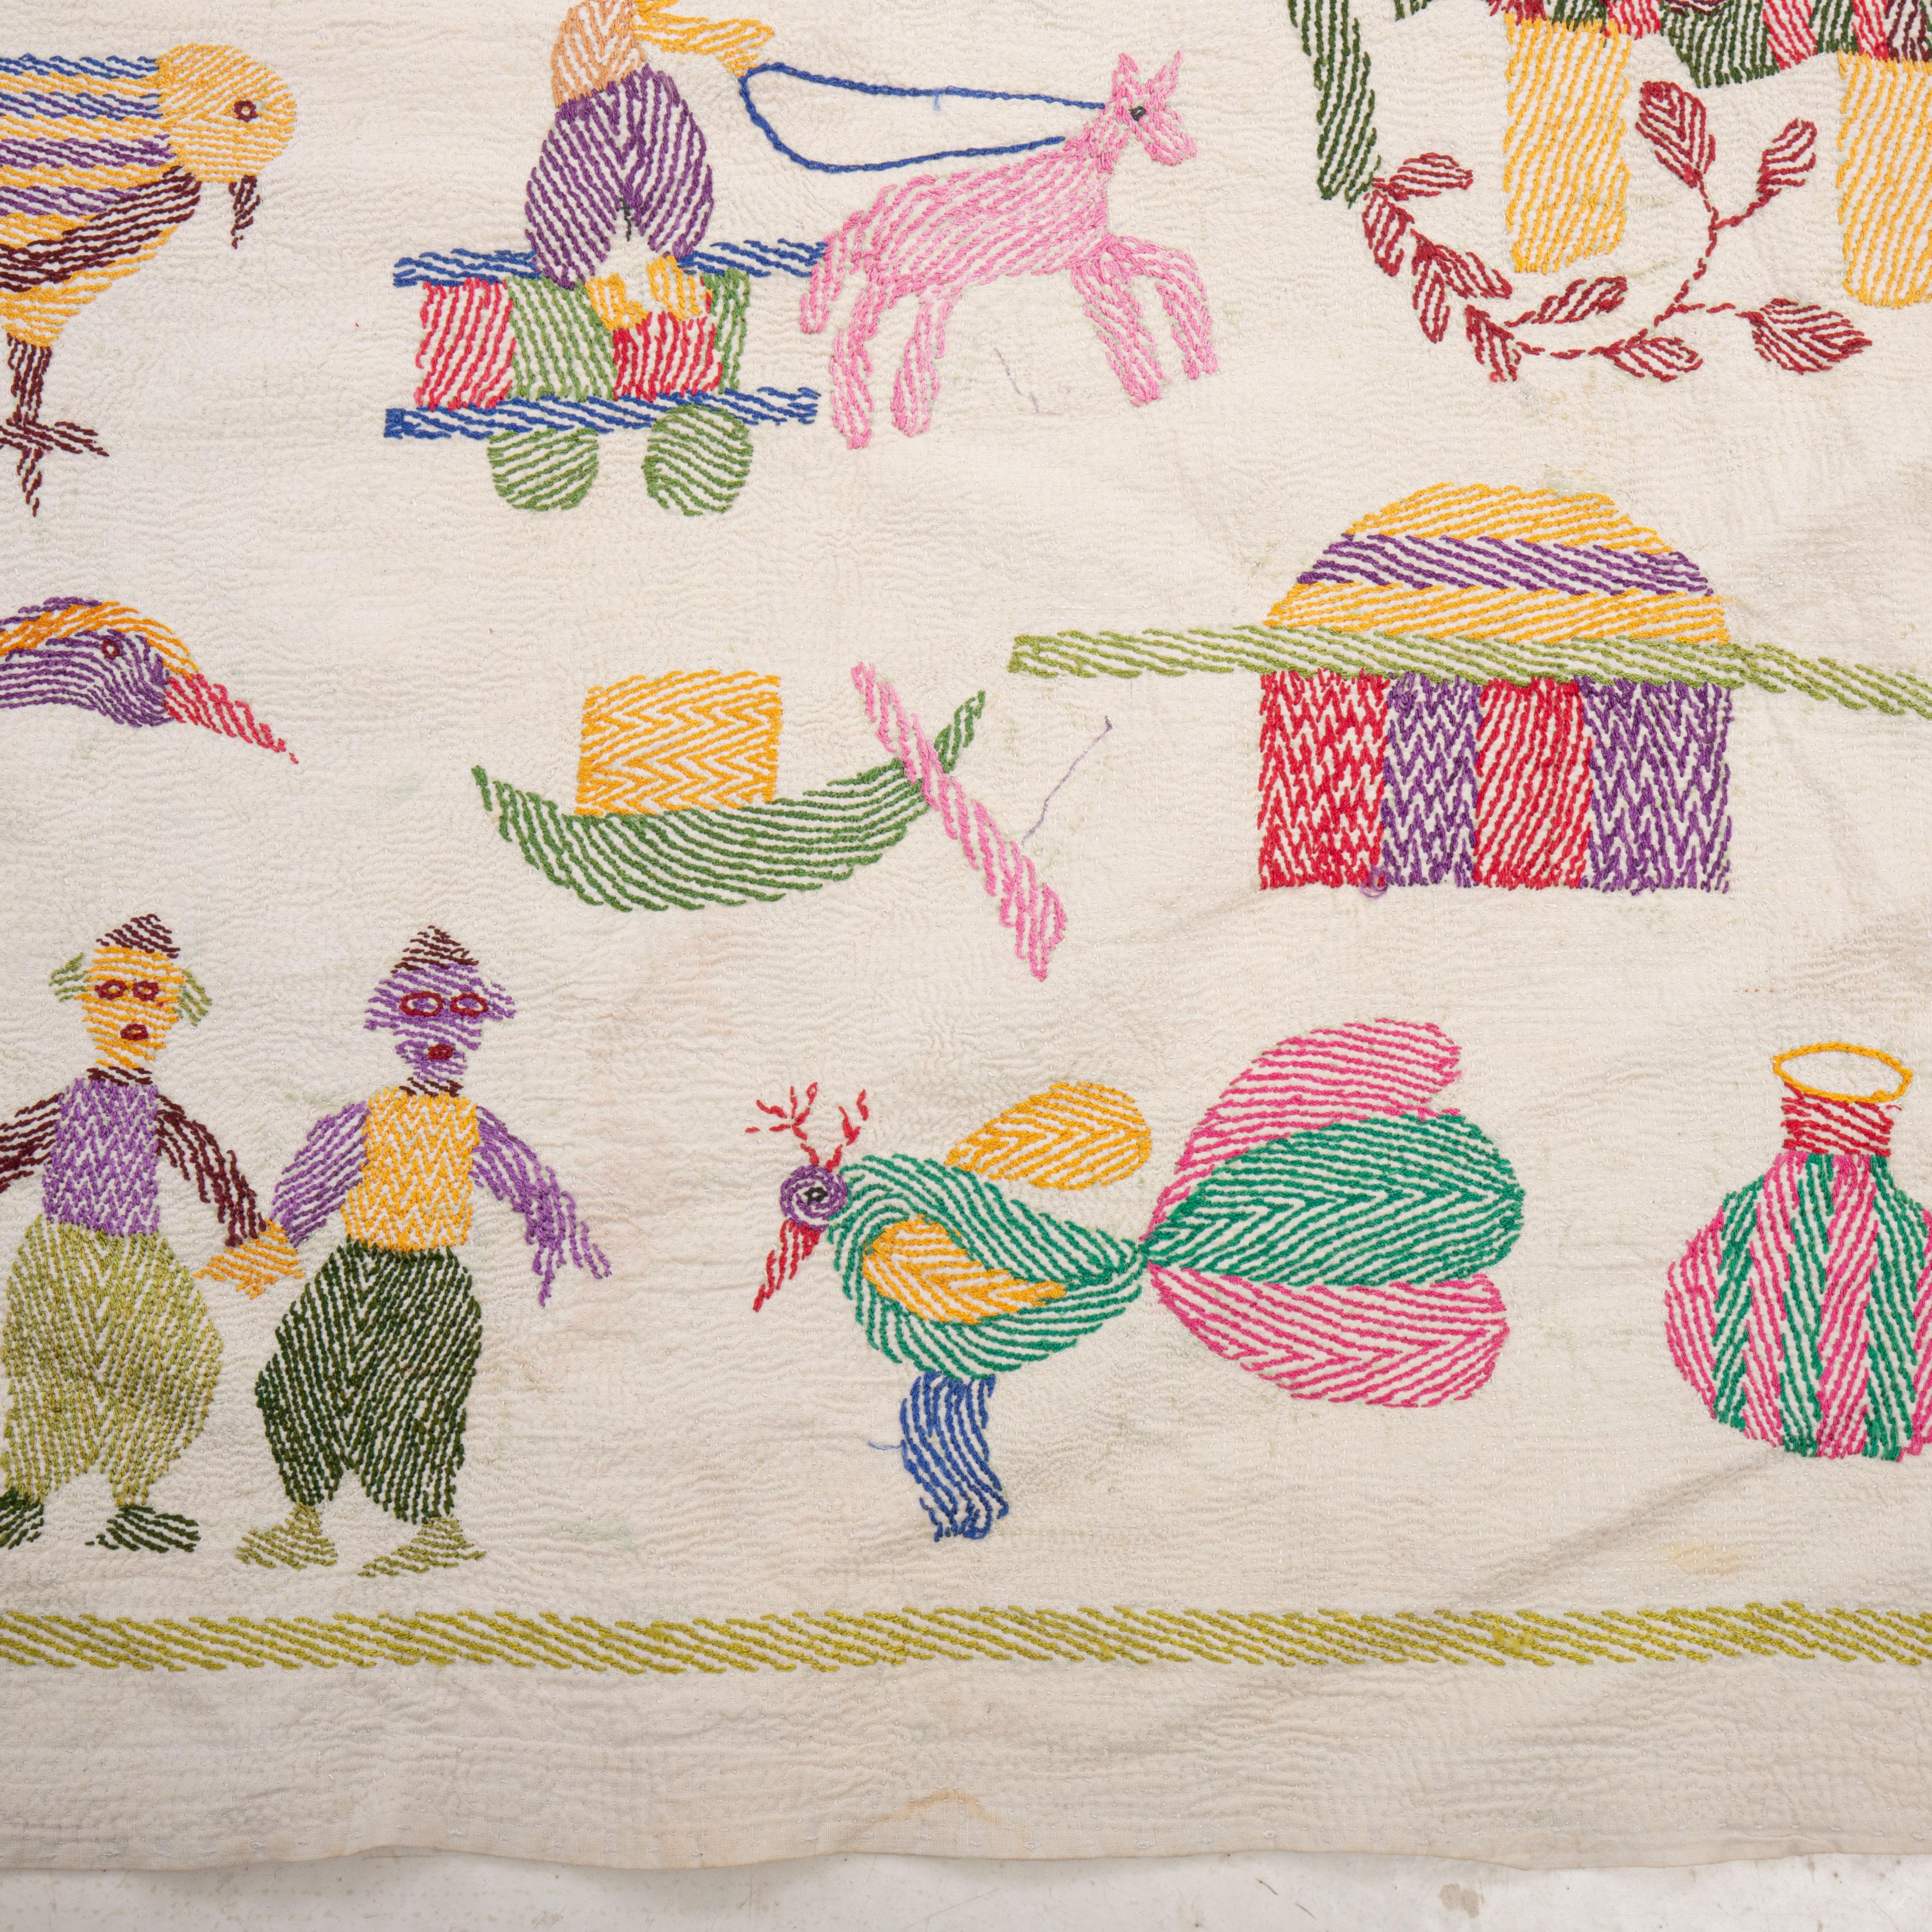 20th Century Bengal Kantha quilt, Mid 20th C. For Sale